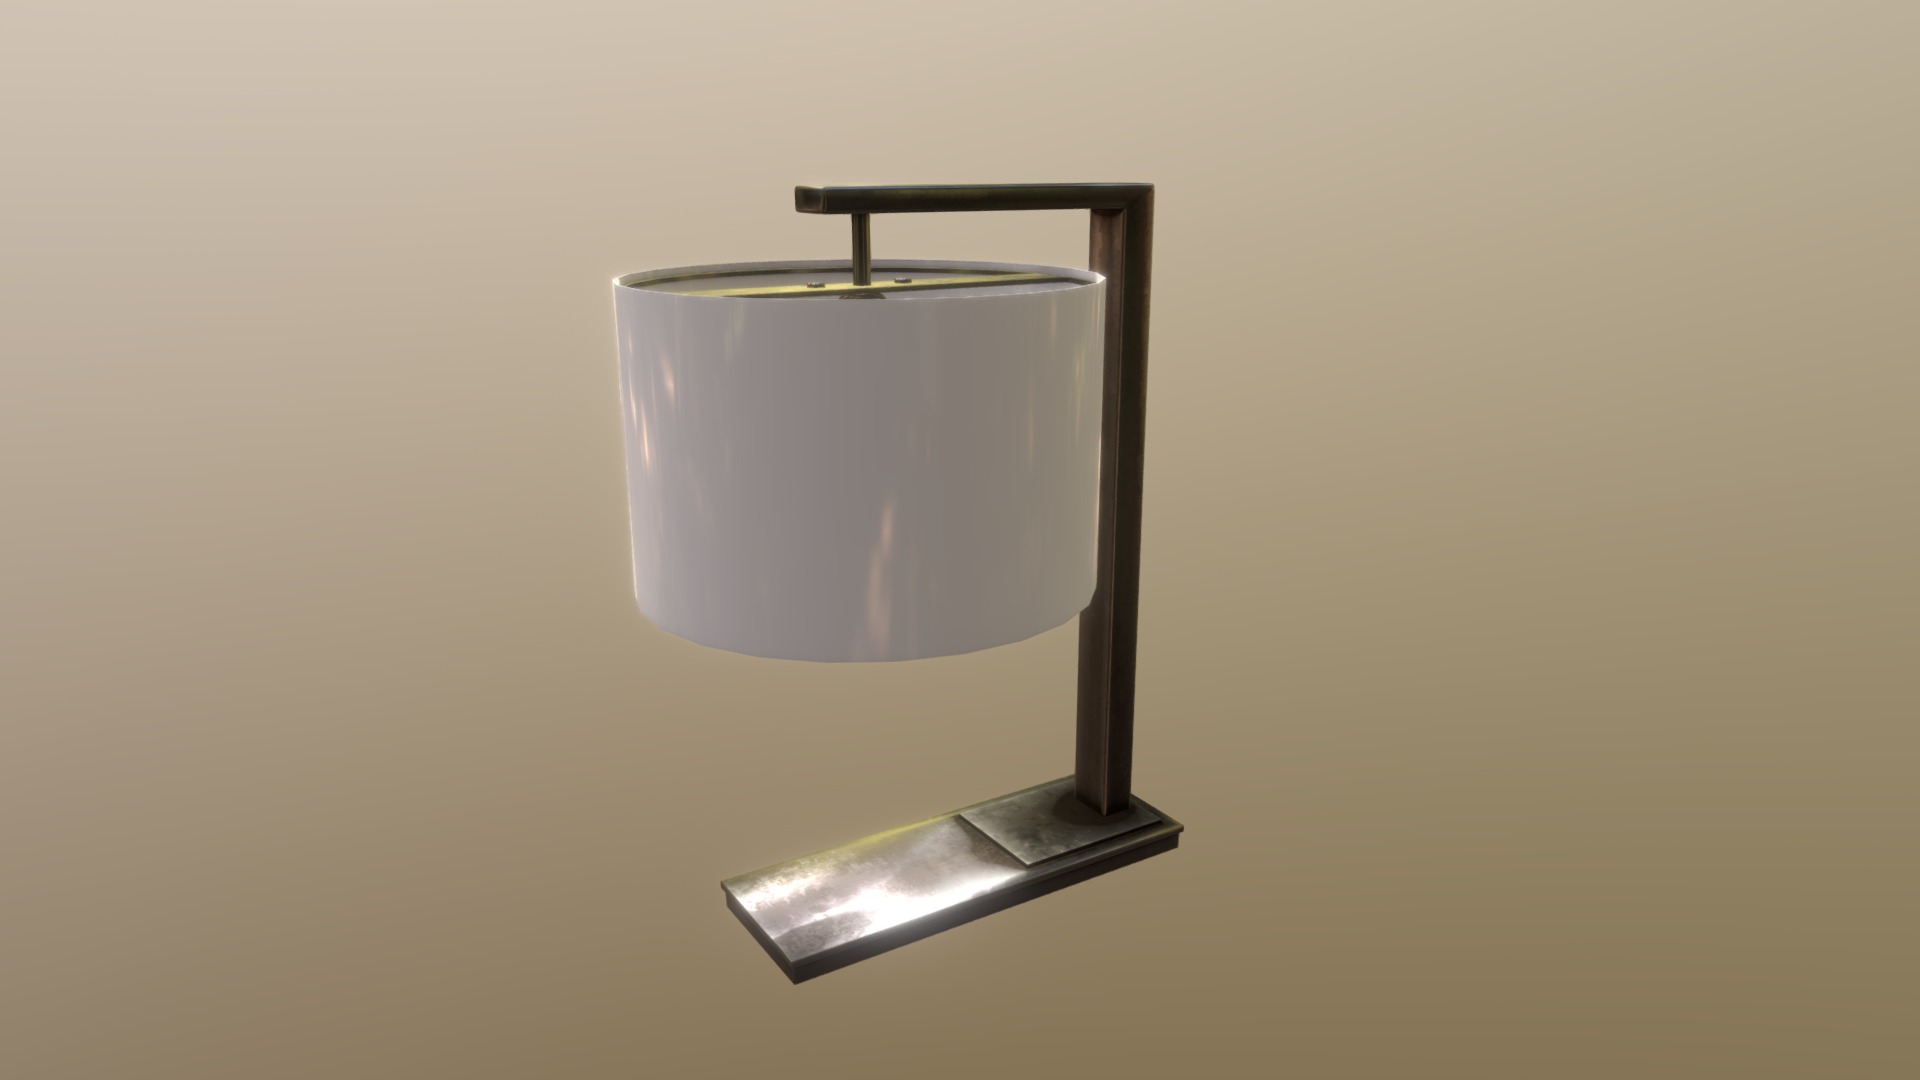 3D model Lamp 14 - This is a 3D model of the Lamp 14. The 3D model is about a lamp on a wall.